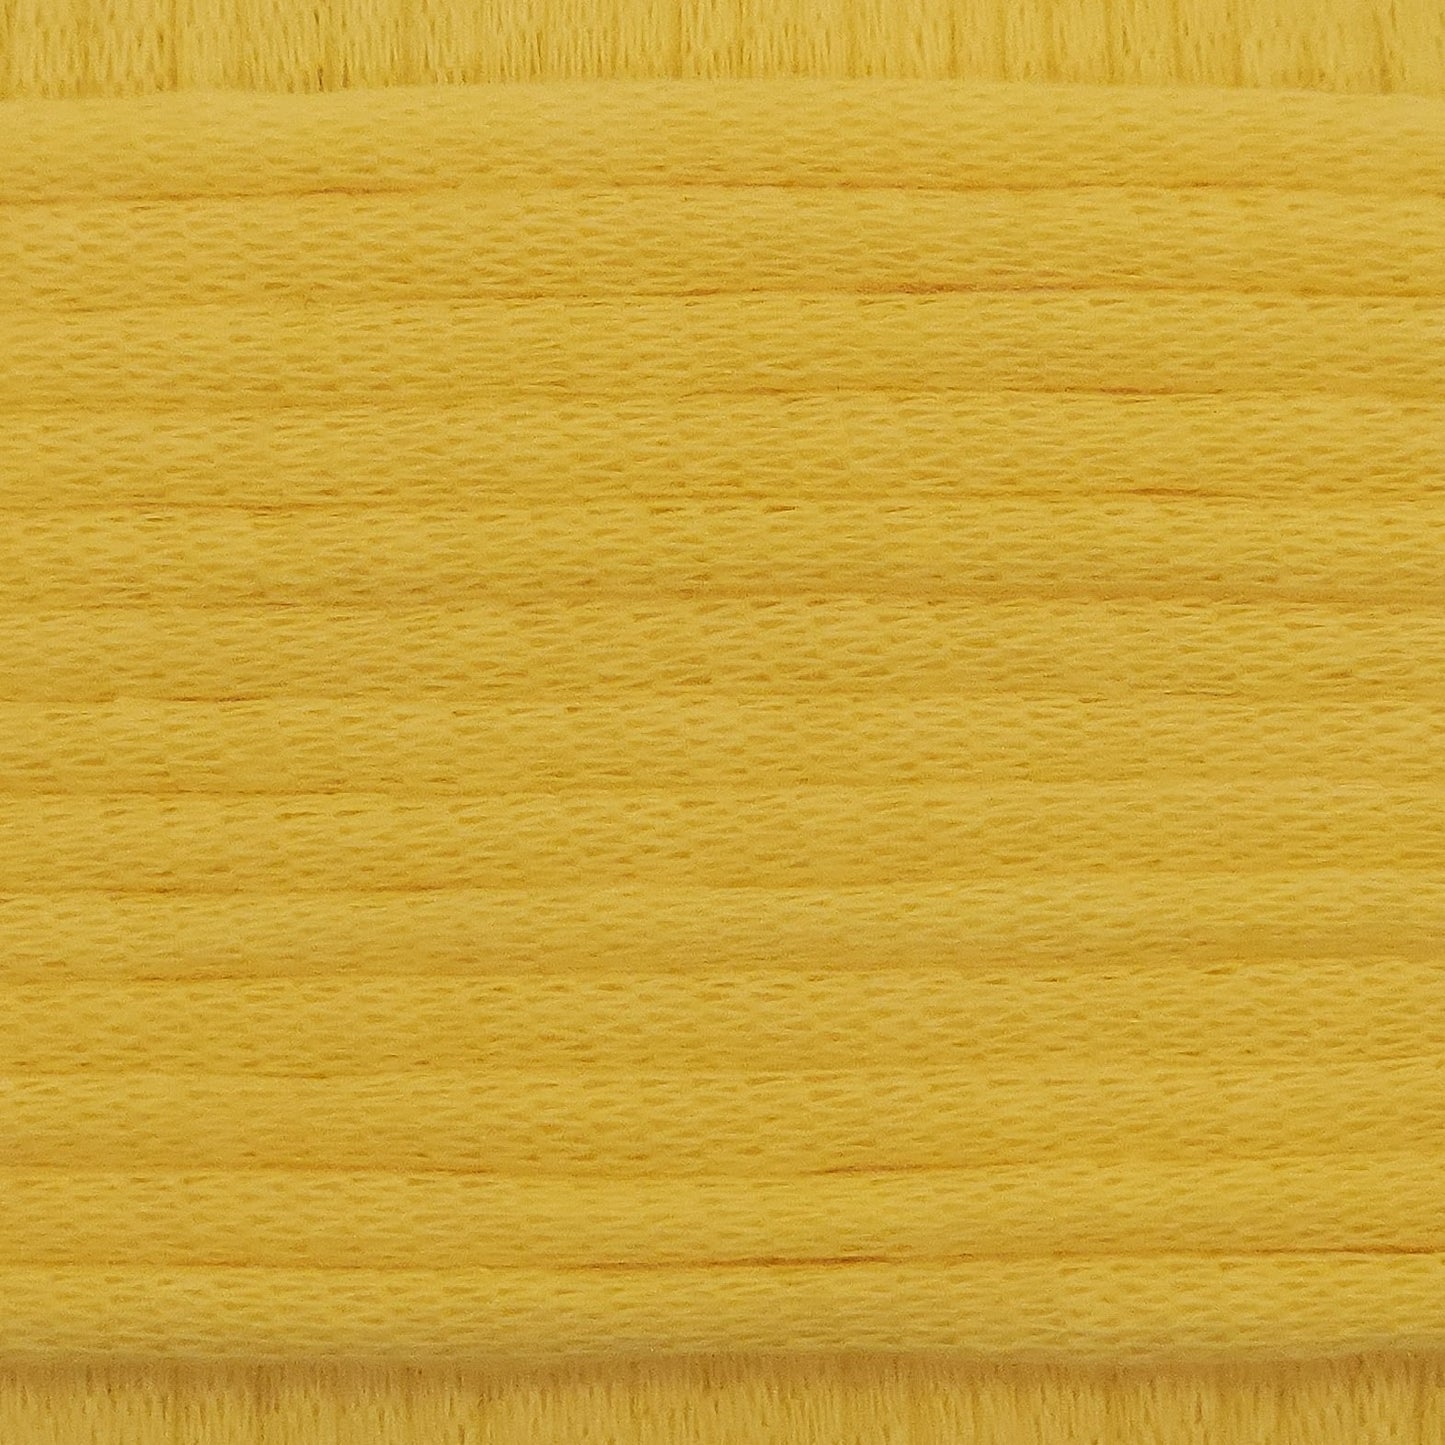 A close-up image showing the texture of a sunshine yellow coloured yarn that is friendly for crochet beginners.